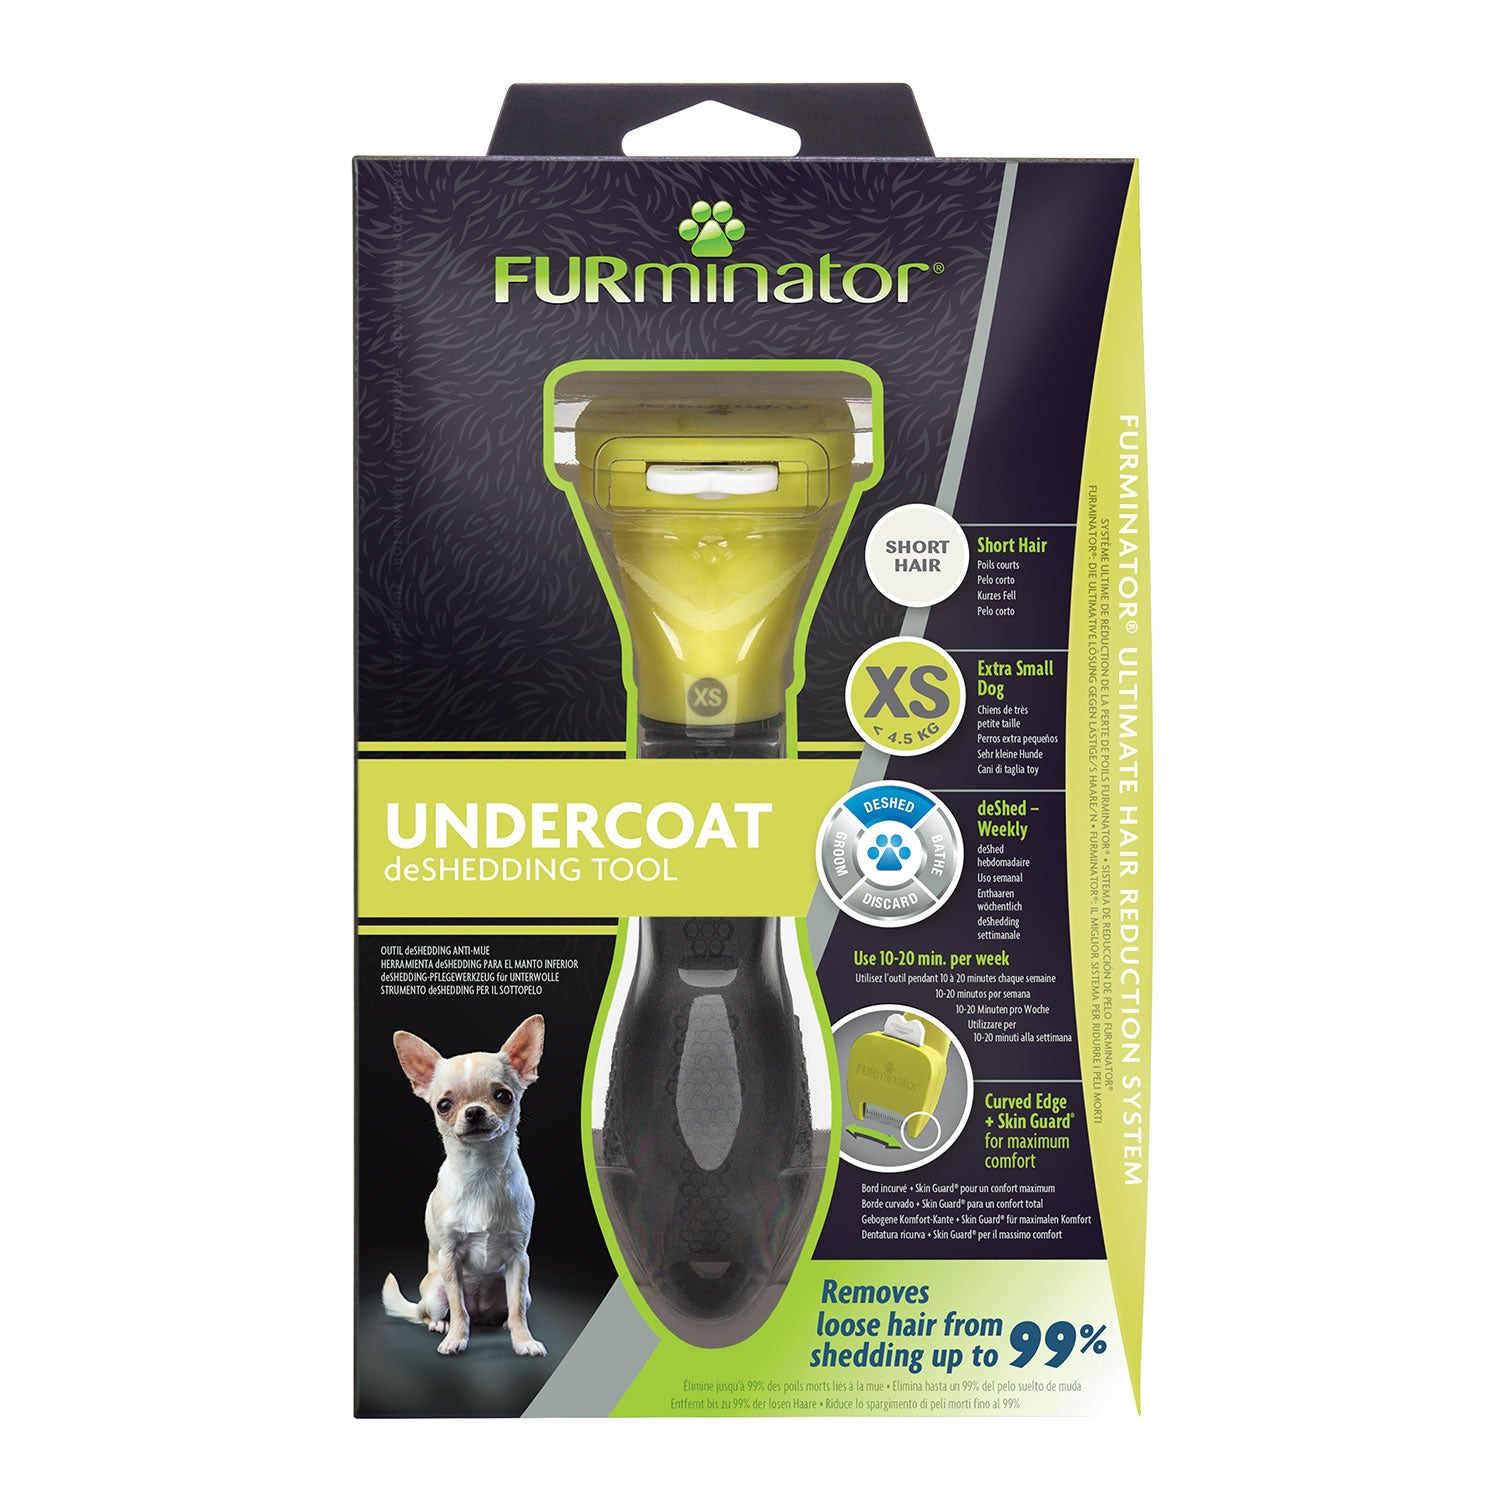 Dog Grooming Accessory Furminator Undercoat Deshedding Tool For Dogs Short Hair X-Small